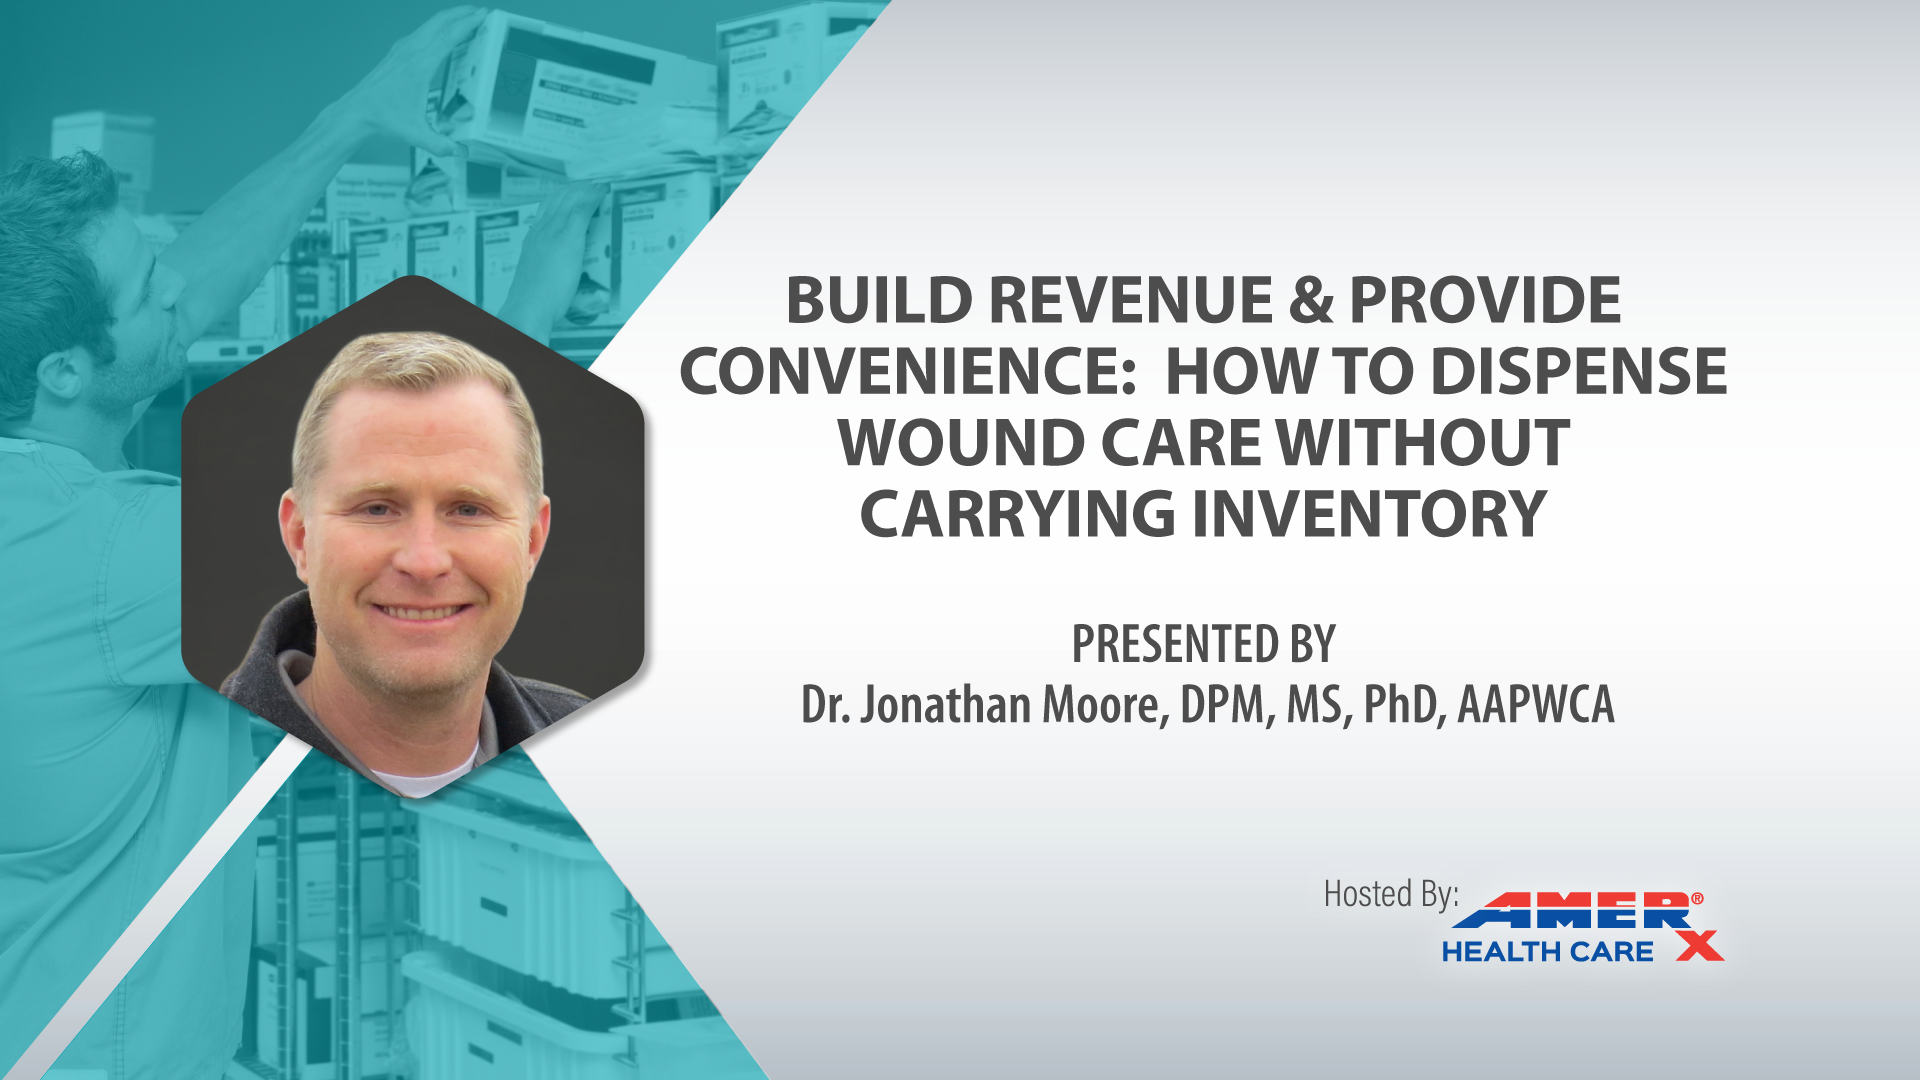 Webinar - Build Revenue & Provide Convenience - How To Dispense Wound Care Without Carrying Inventory